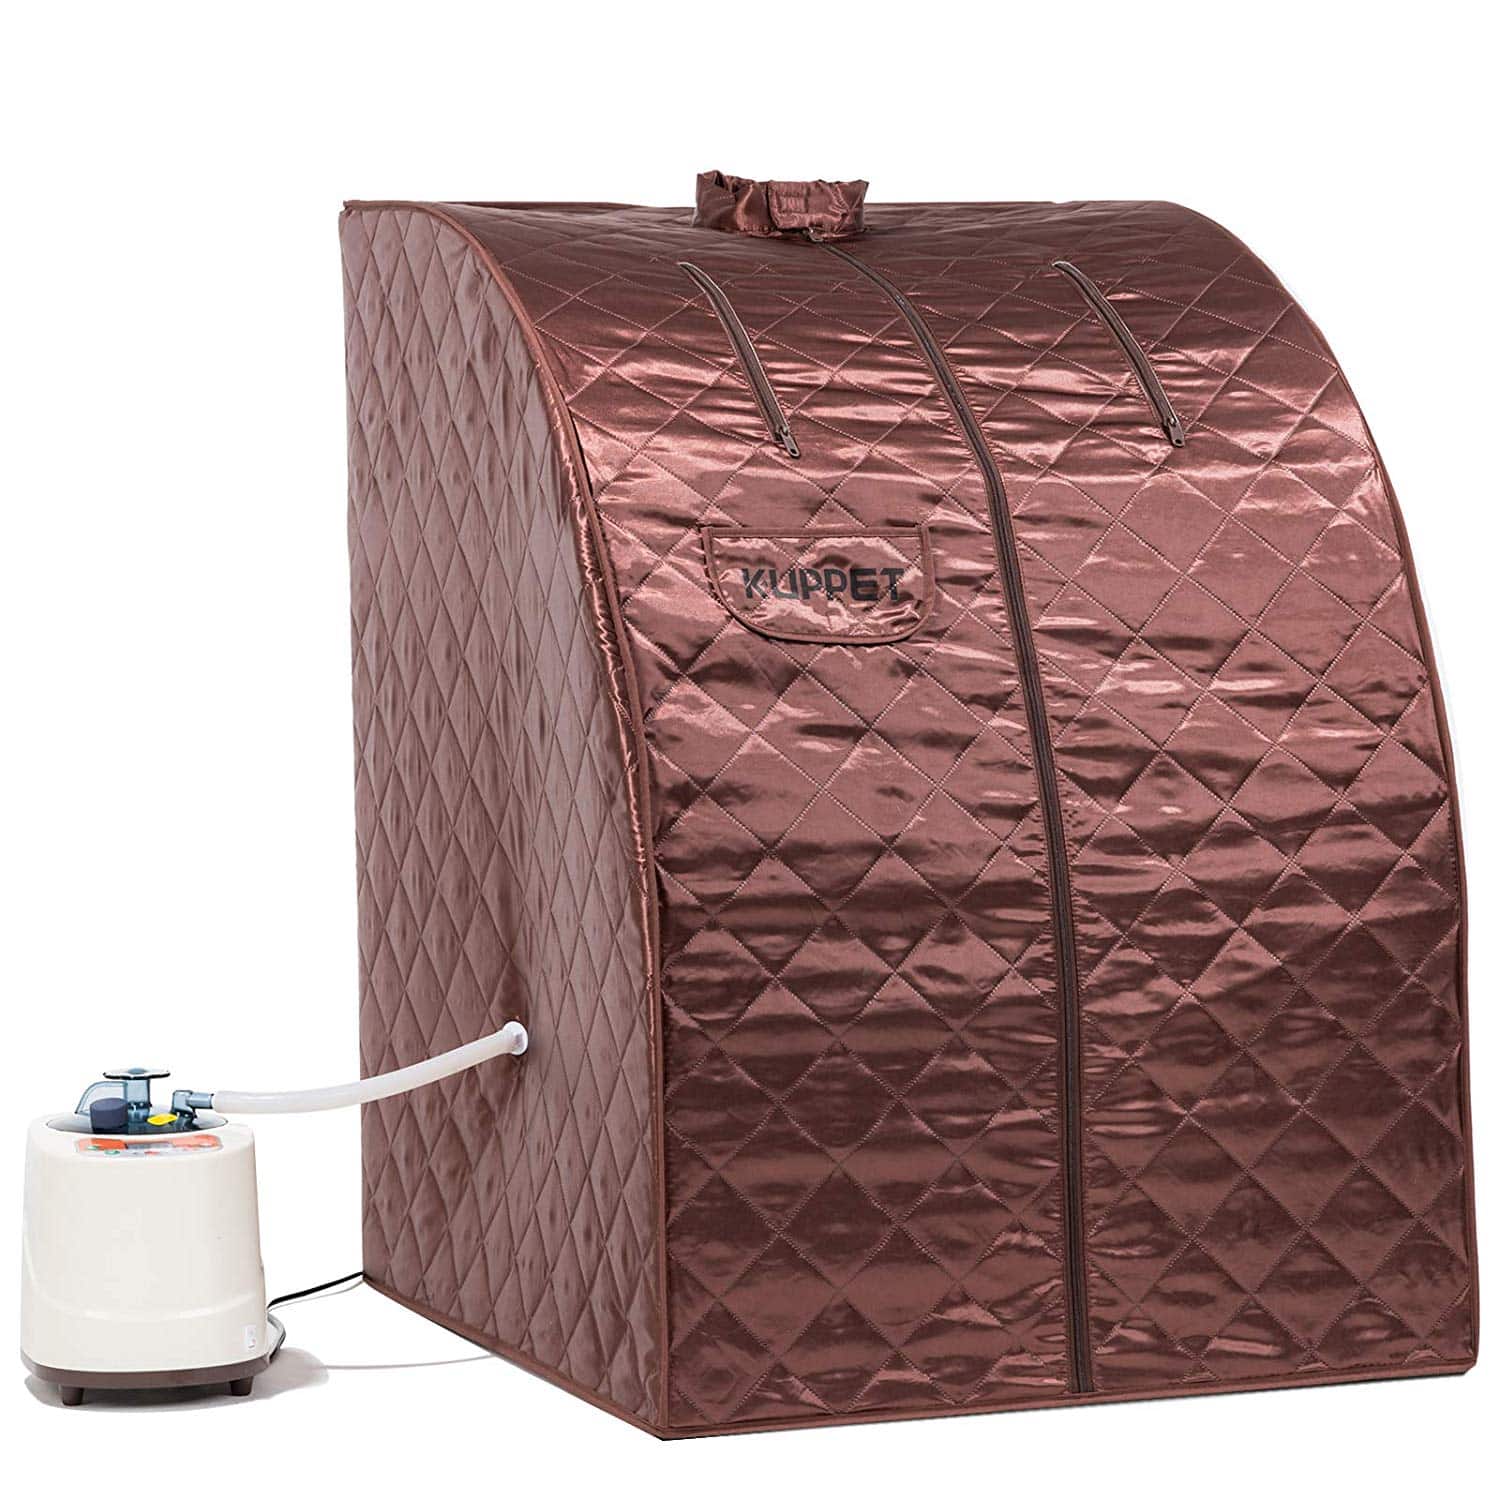 Top 10 Best Portable Sauna for Home in 2021 Reviews Buyer's Guide